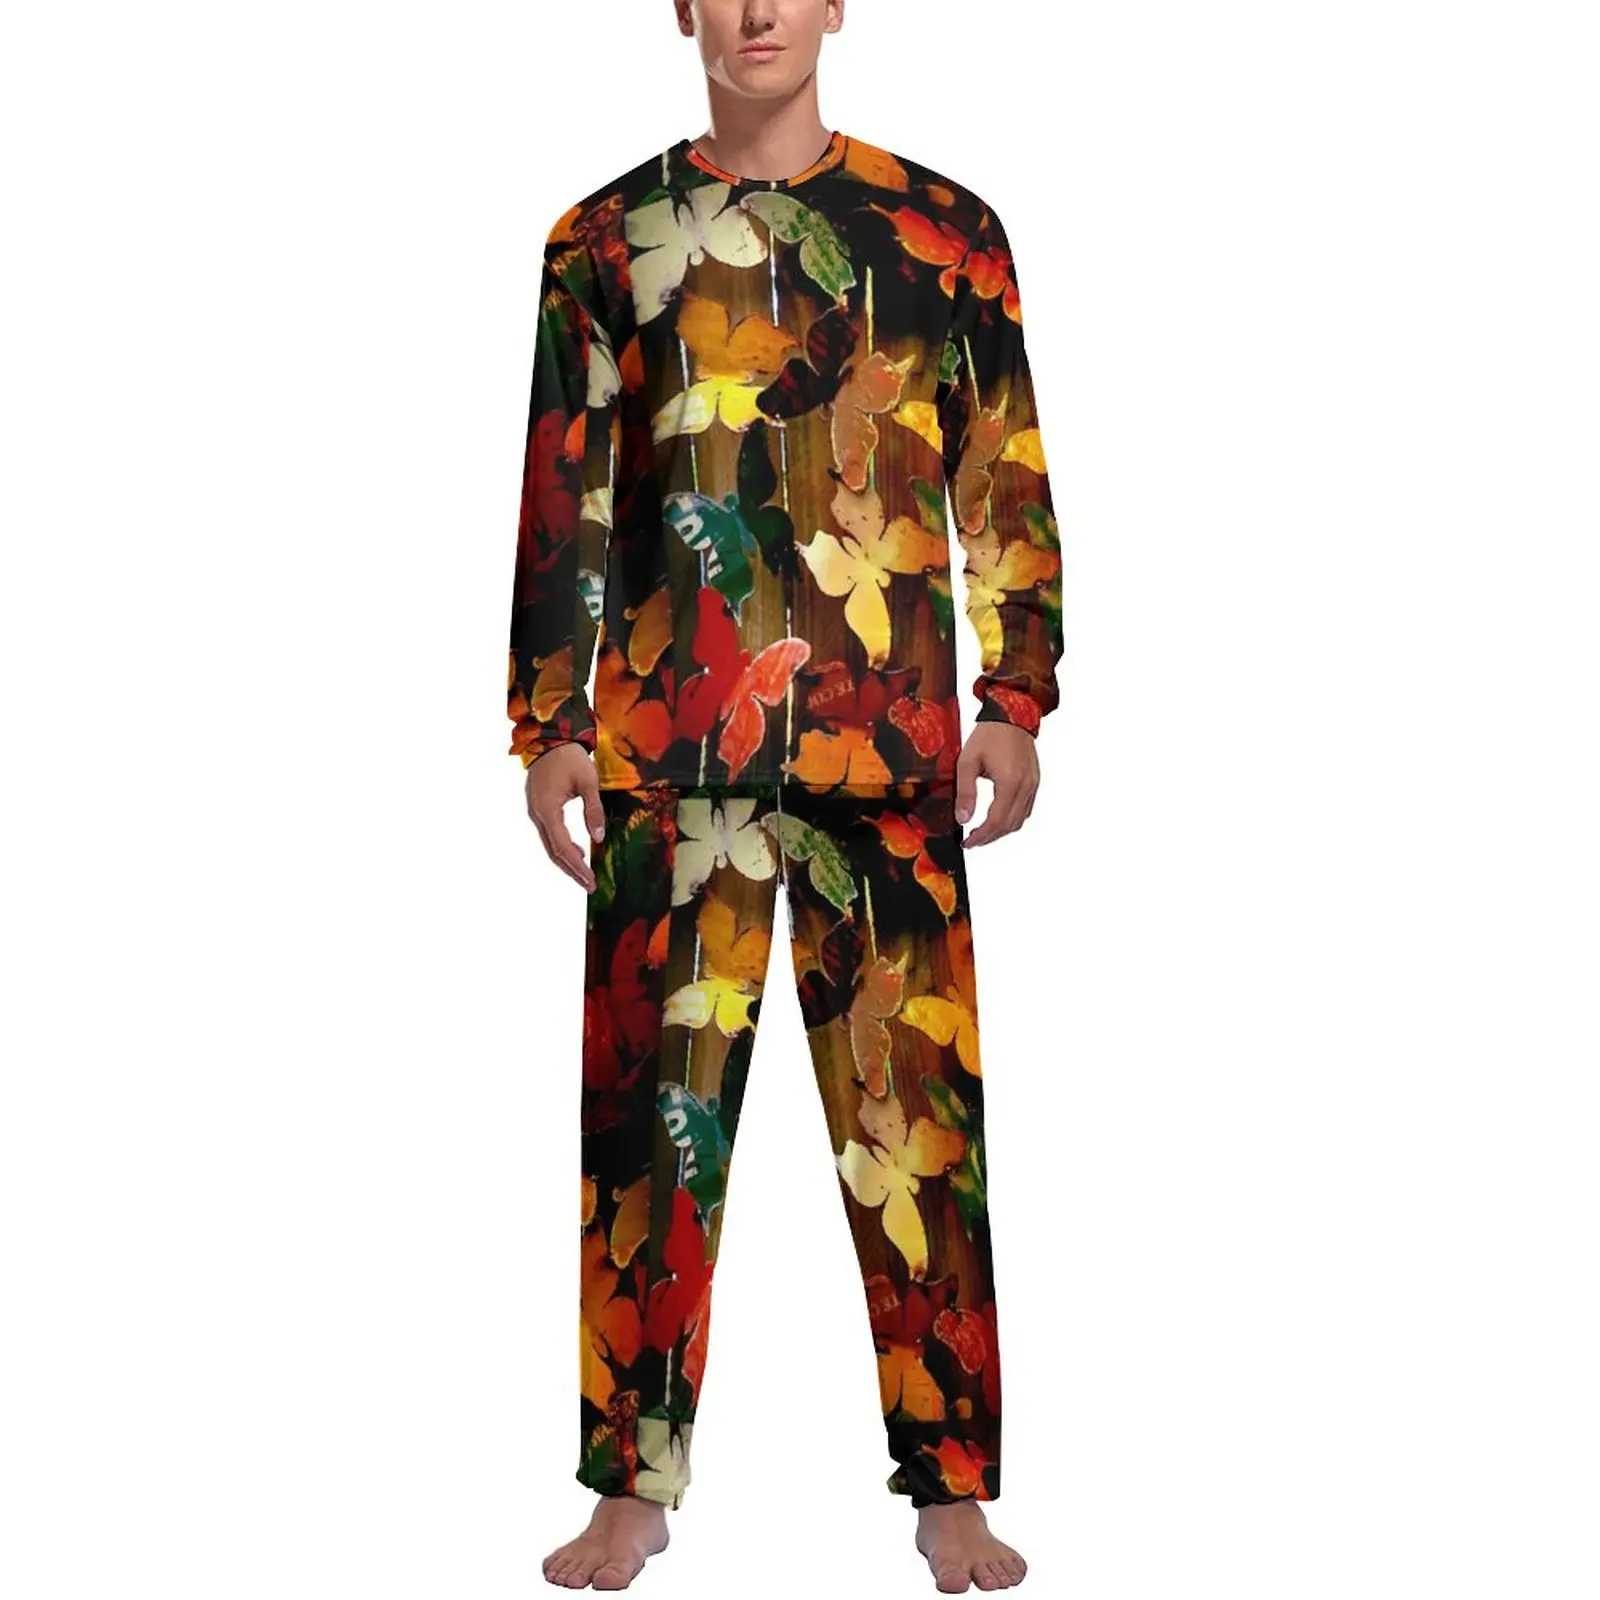 Butterfly Art Pajamas Spring 2 Pieces Colorful Butterflies Print Trendy Pajama Sets Man Long-Sleeve Room Graphic Nightwear